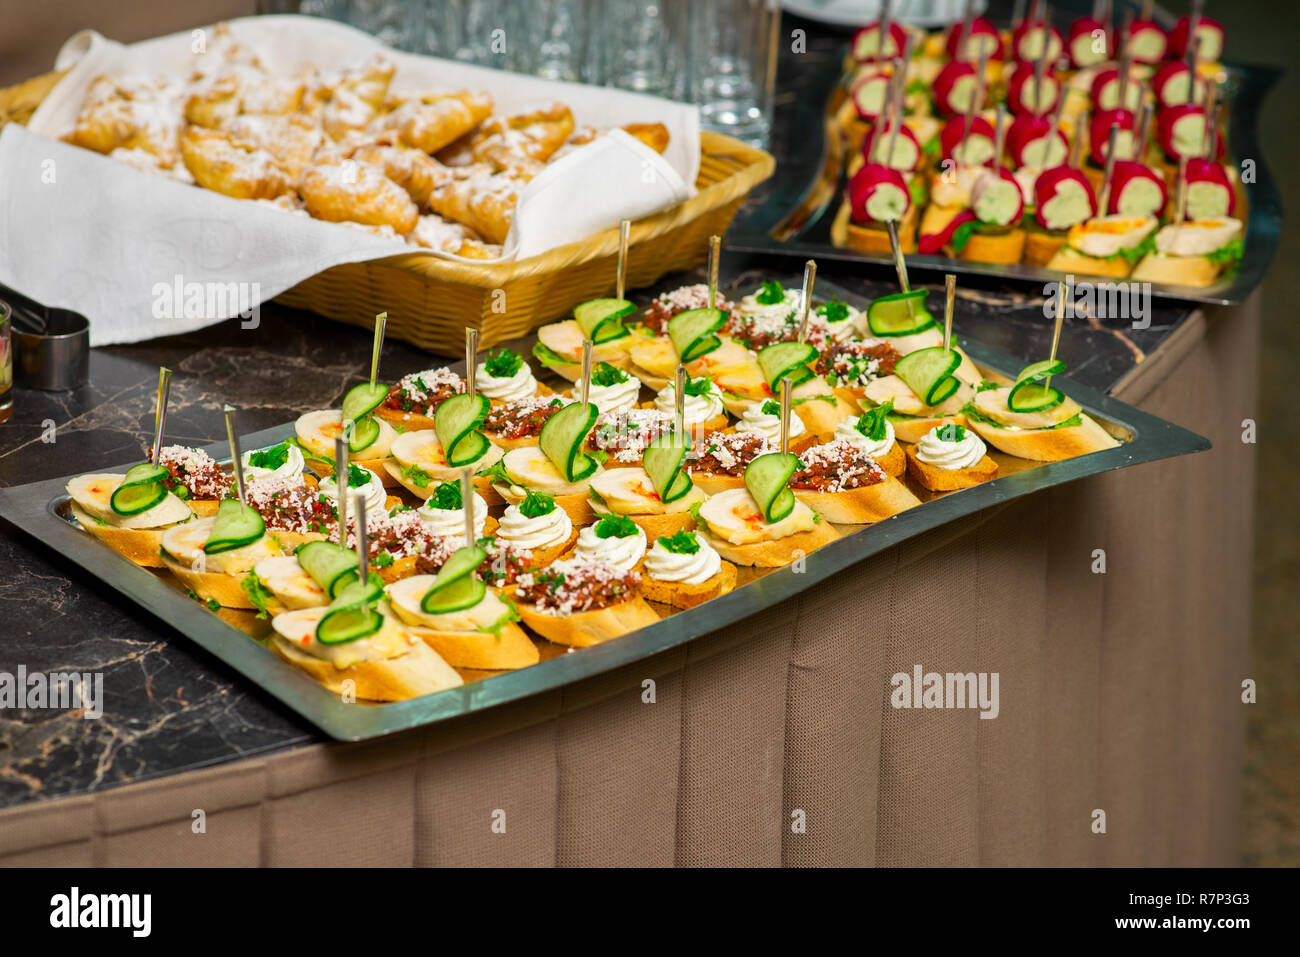 Canapes And Cold Appetizers On The Buffet Table Meat Vegetables And Herbs On A Tray Stock Photo Alamy